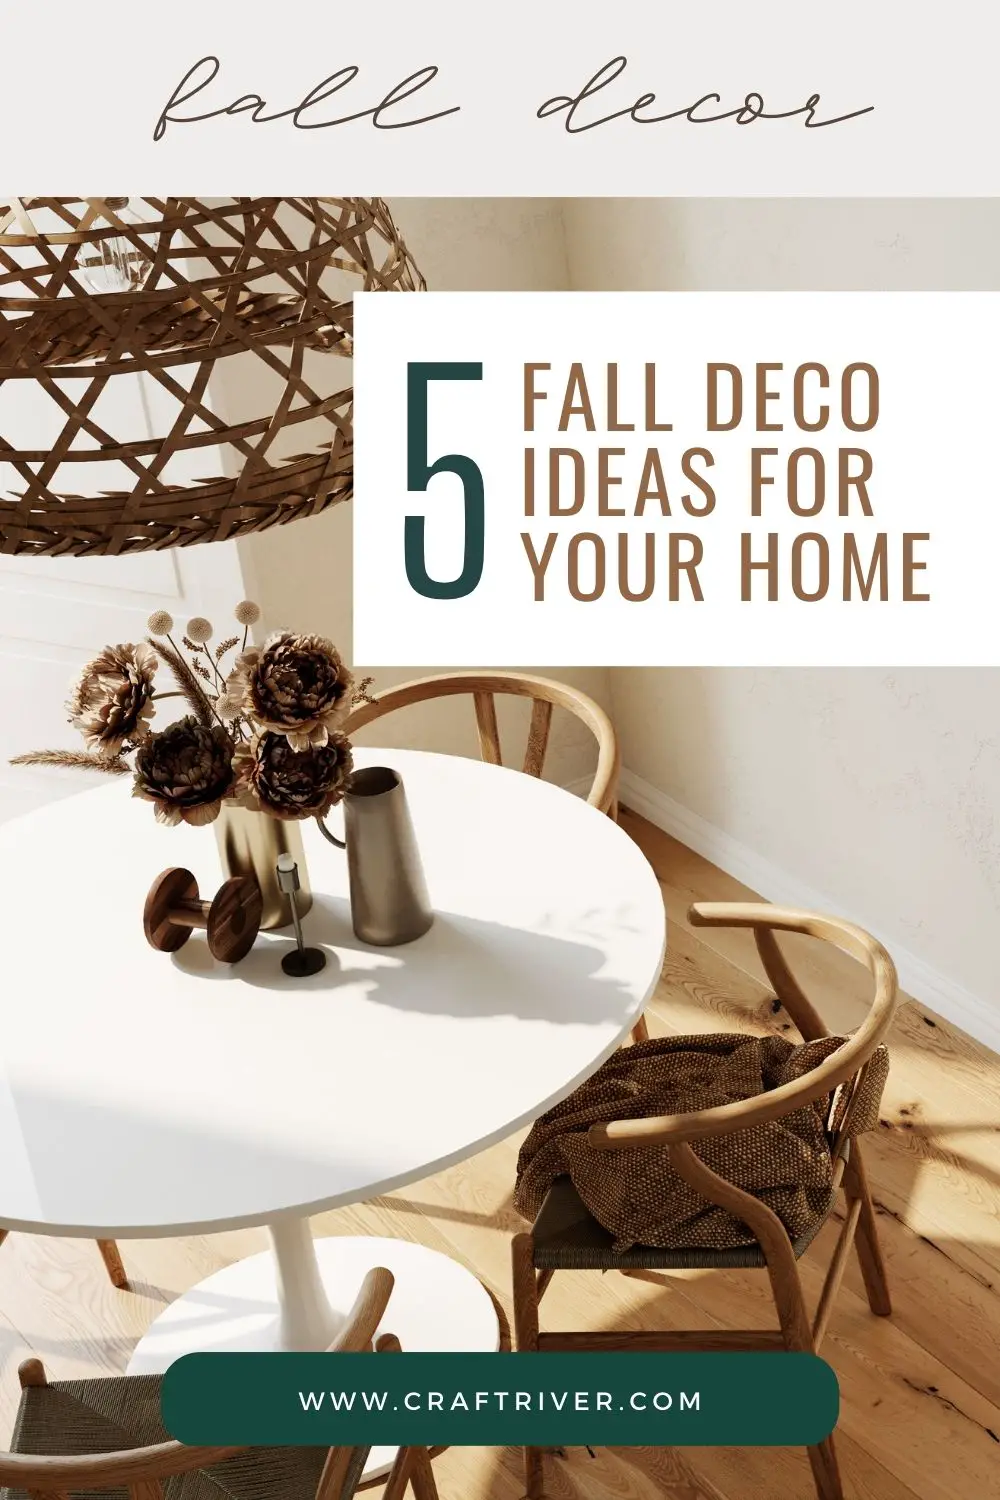 5 DIY Fall Decorating Ideas for Home